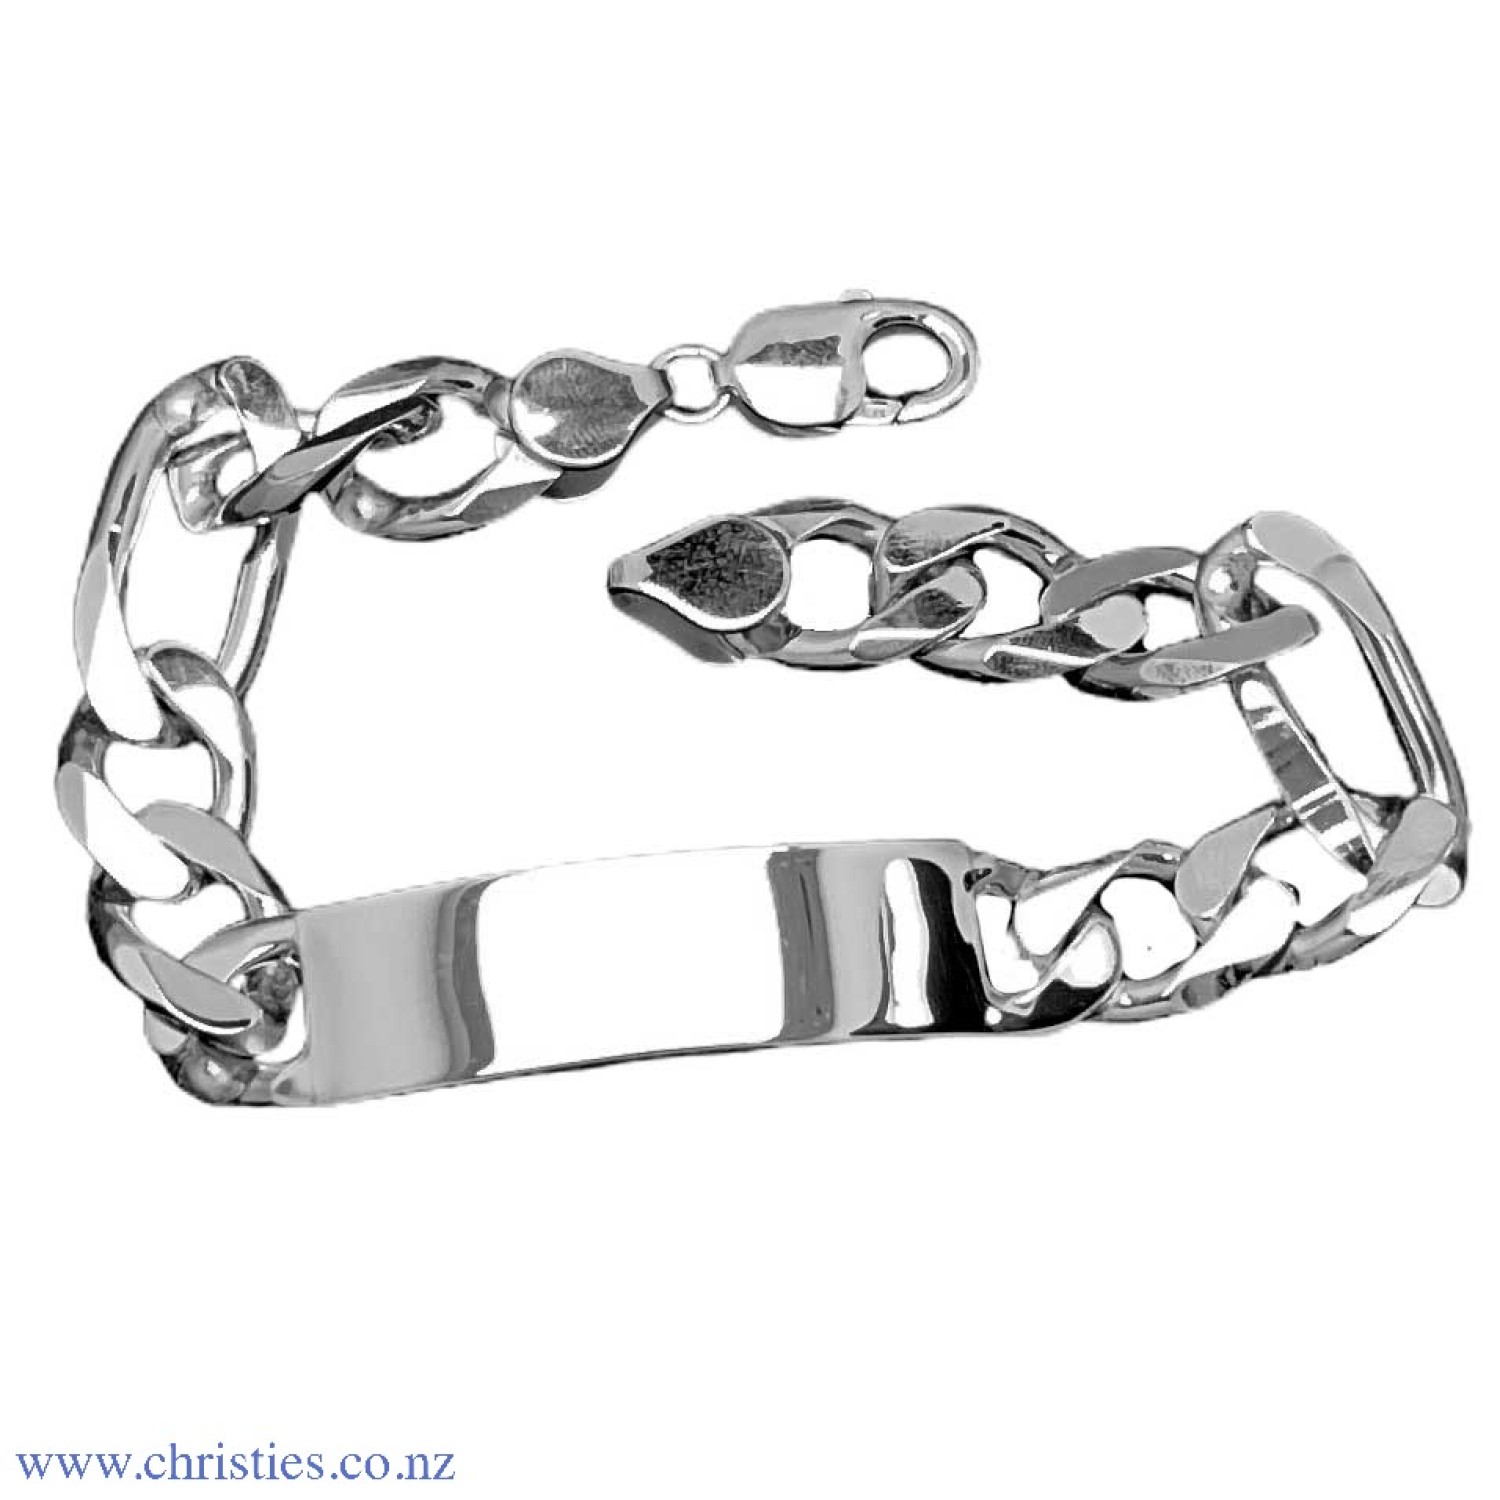 20633 Sterling Silver ID Figaro Heavy Bracelet. Heavy weight  Identification bracelet crafted in 925 sterling silver  Afterpay - Split your purchase into 4 instalments - Pay for your purchase over 4 instalments, due every two weeks. You’ll pay @christies.